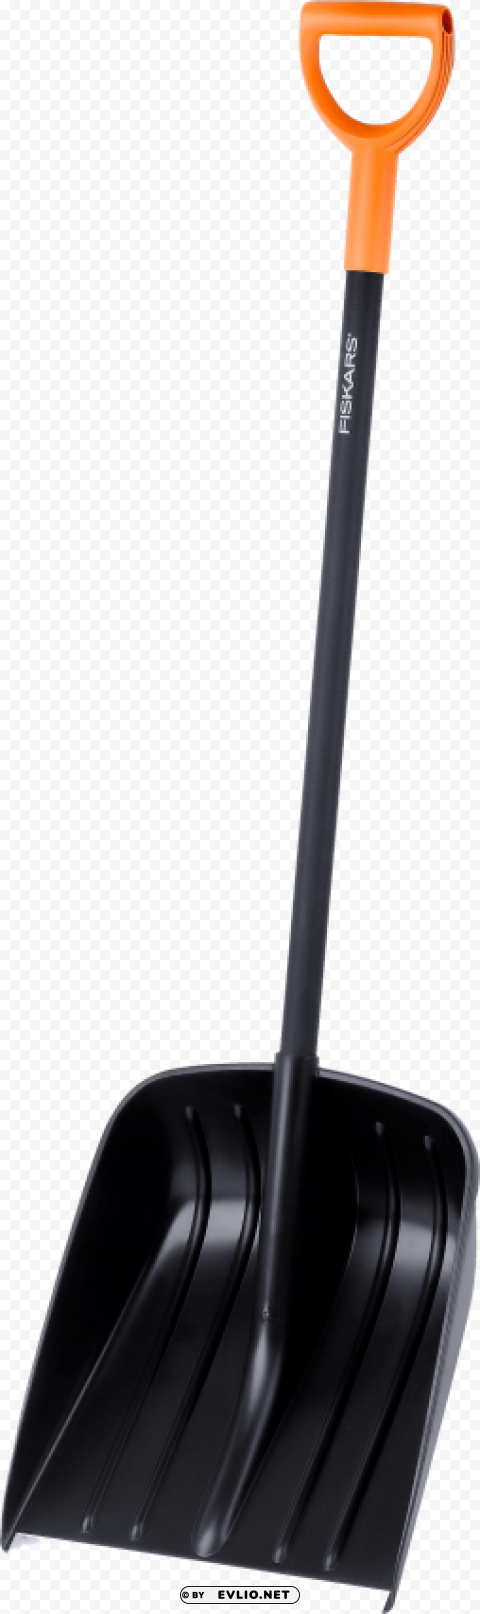 Transparent Background PNG of shovel Transparent Background Isolation in PNG Image - Image ID 1cc05cc9